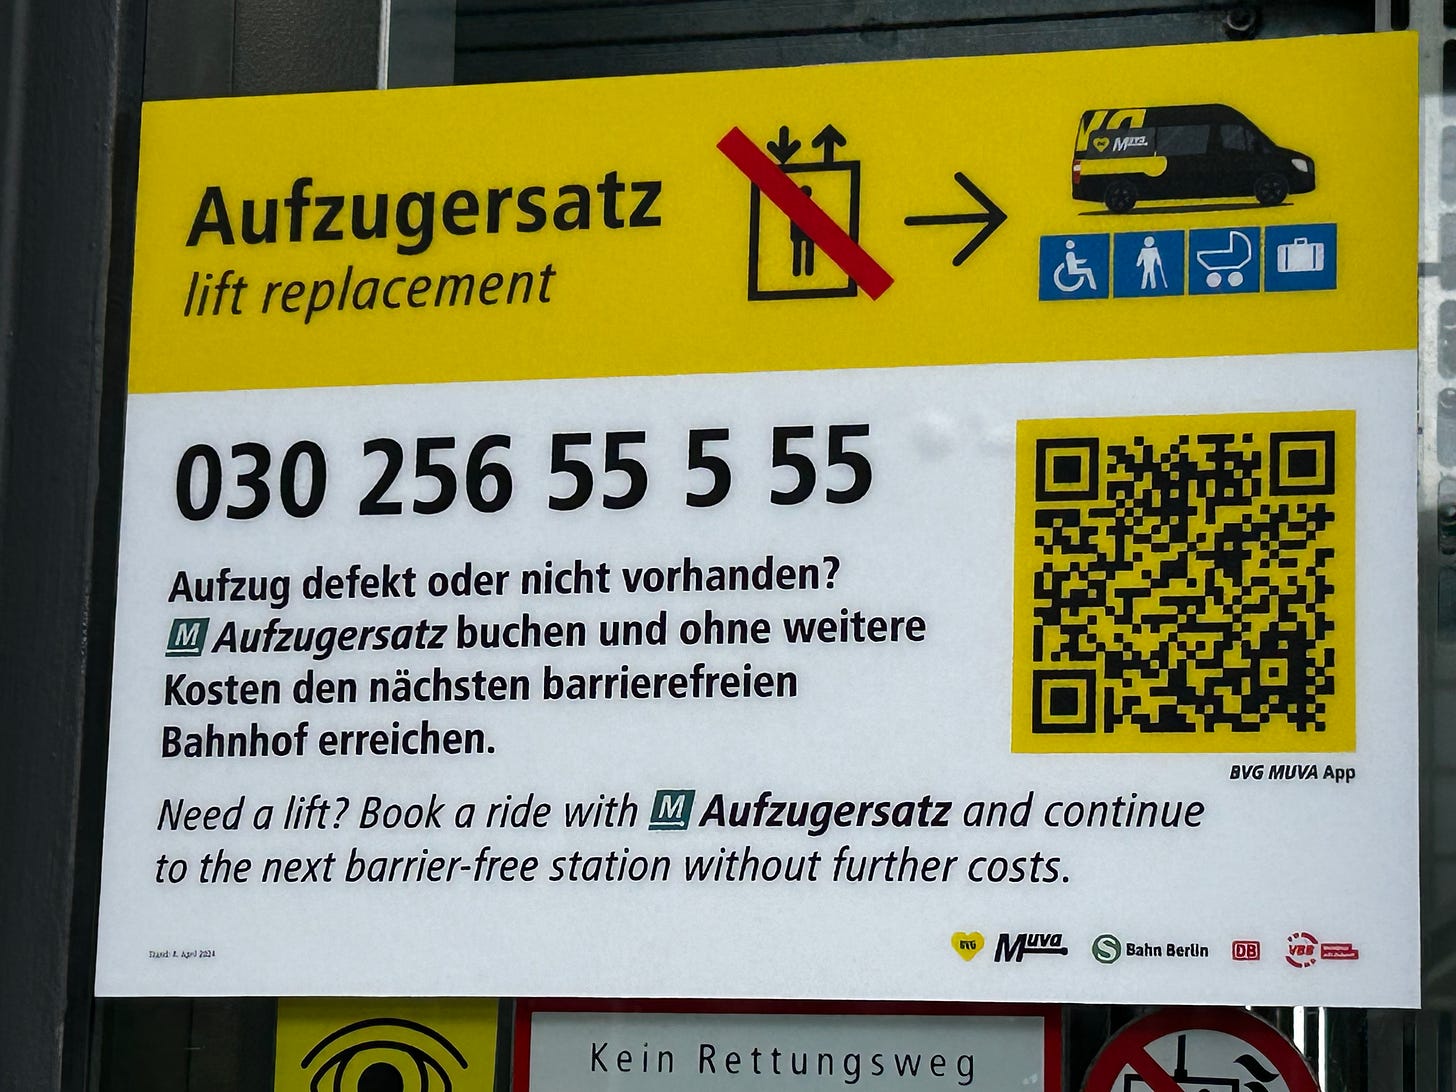 Sign: Lift replacement, 030 256 55555 Need a lift? Book a ride with Aufzugersatz and continue to the next barrier-free station without further costs.